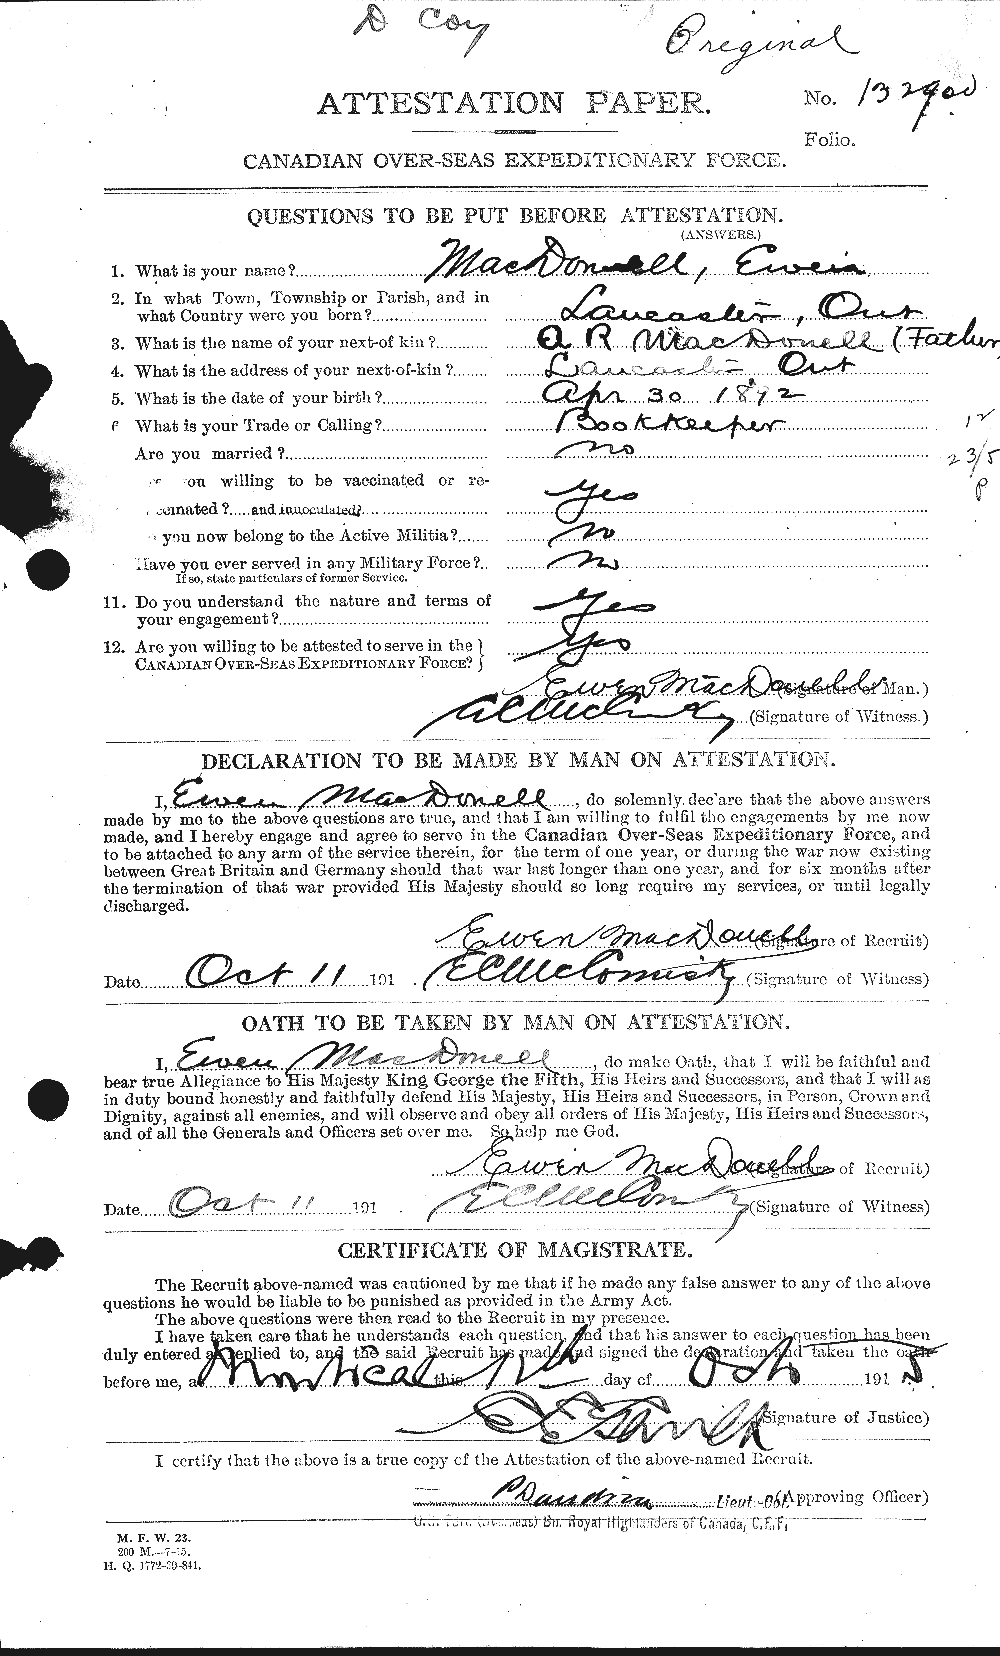 Personnel Records of the First World War - CEF 521435a